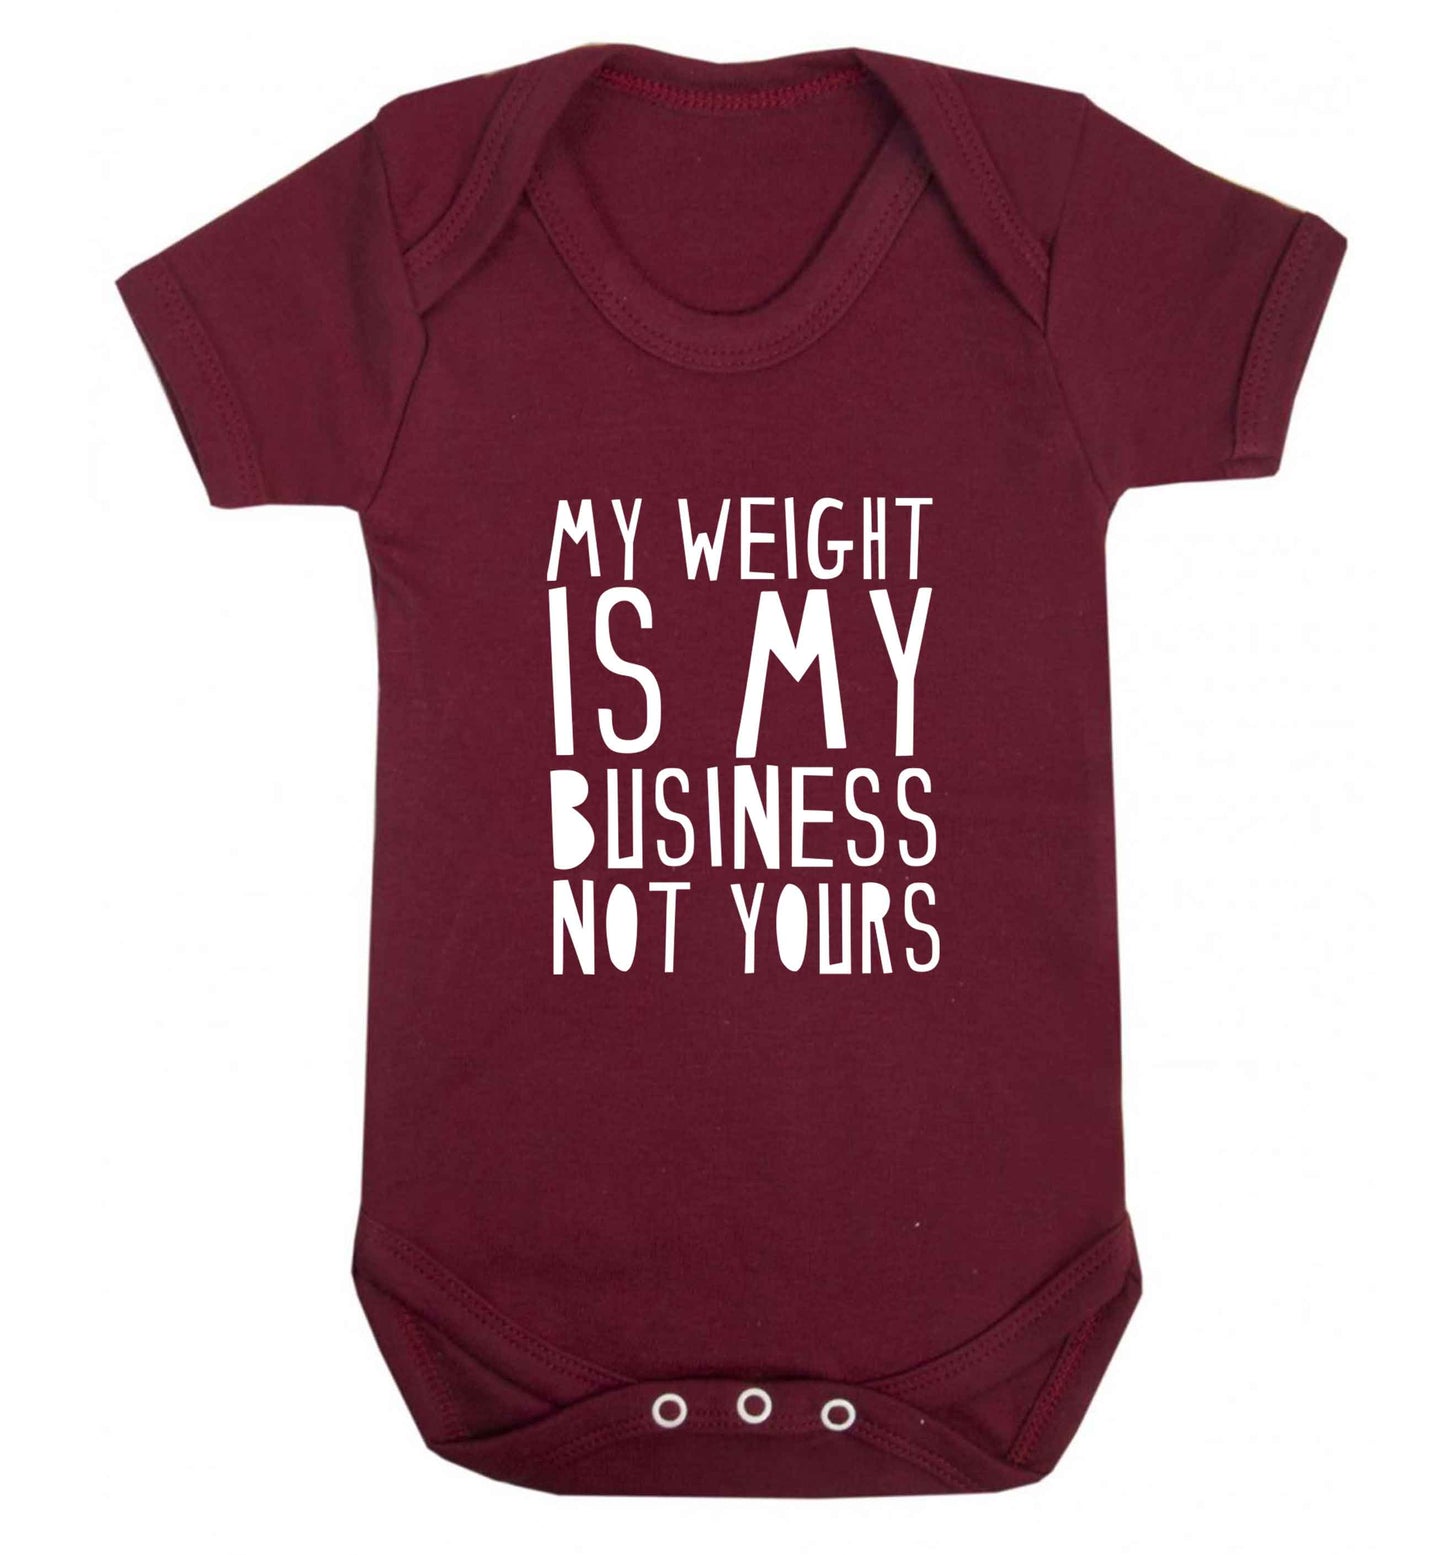 My weight is my business not yours baby vest maroon 18-24 months